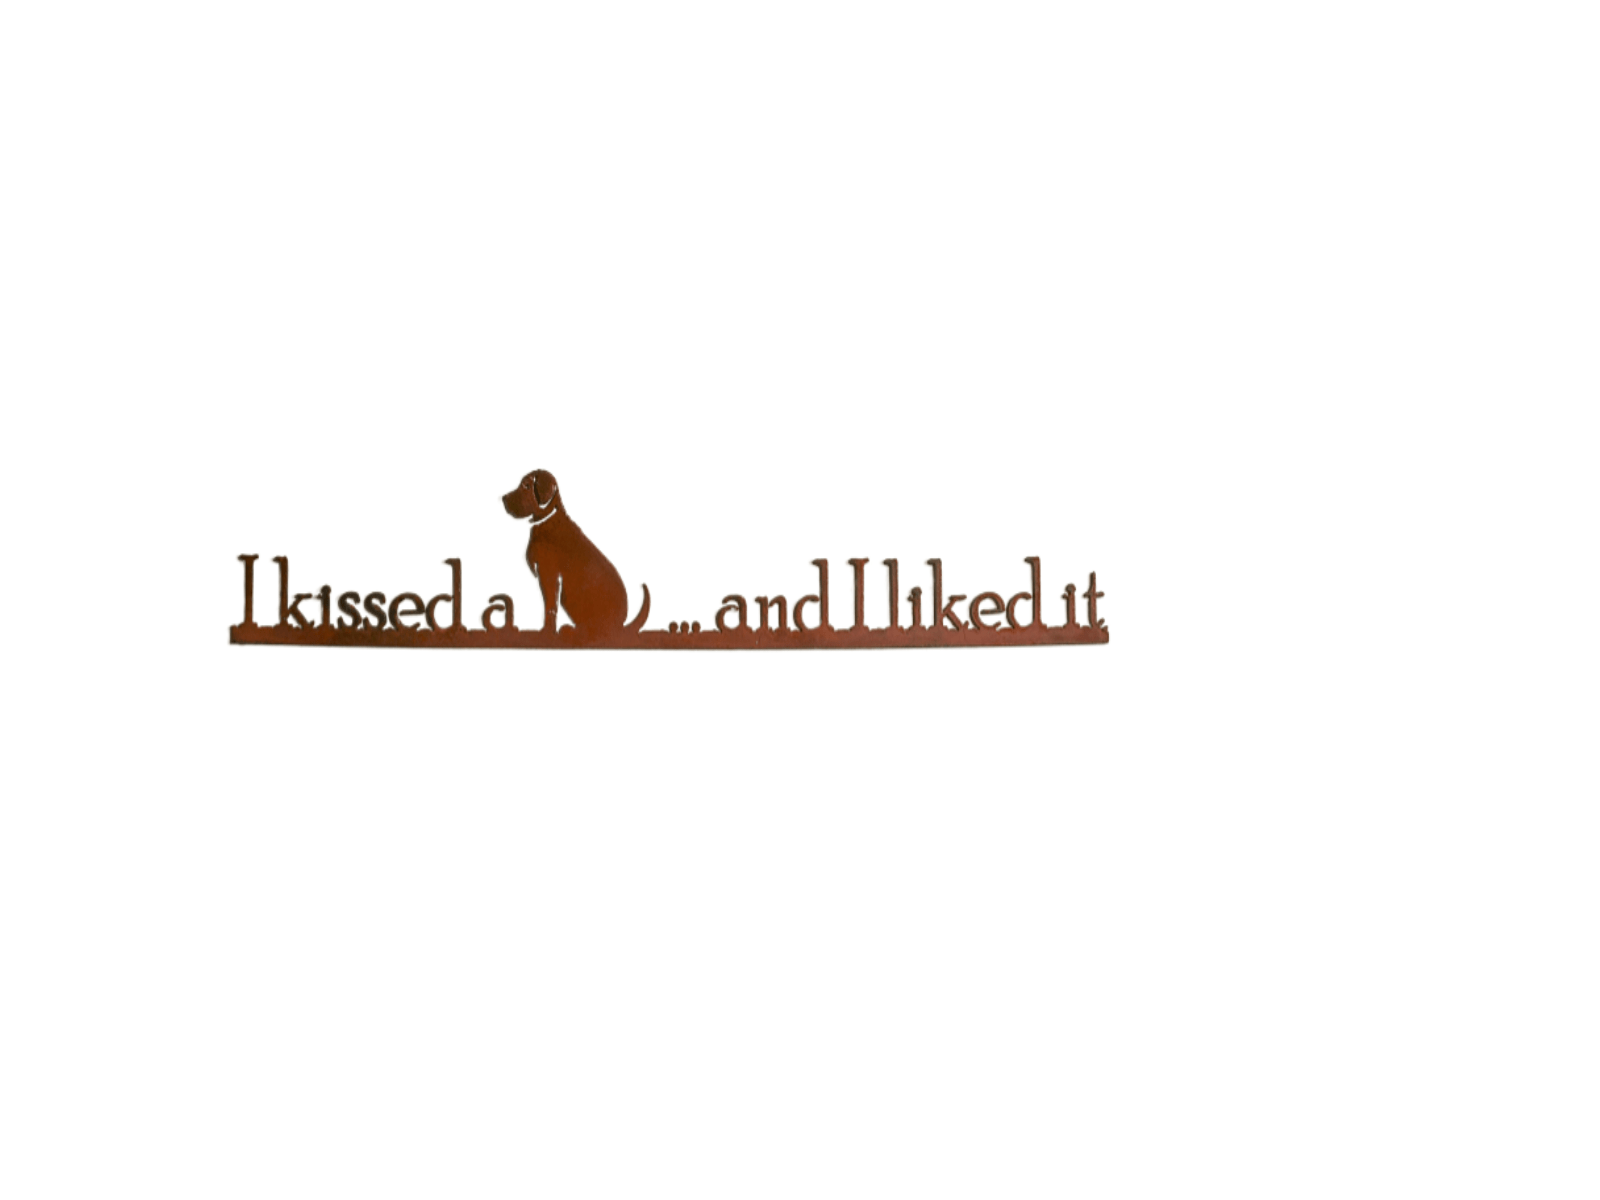 I kissed a Dog and I liked Metal Sign By Elizabeth Keith Designs